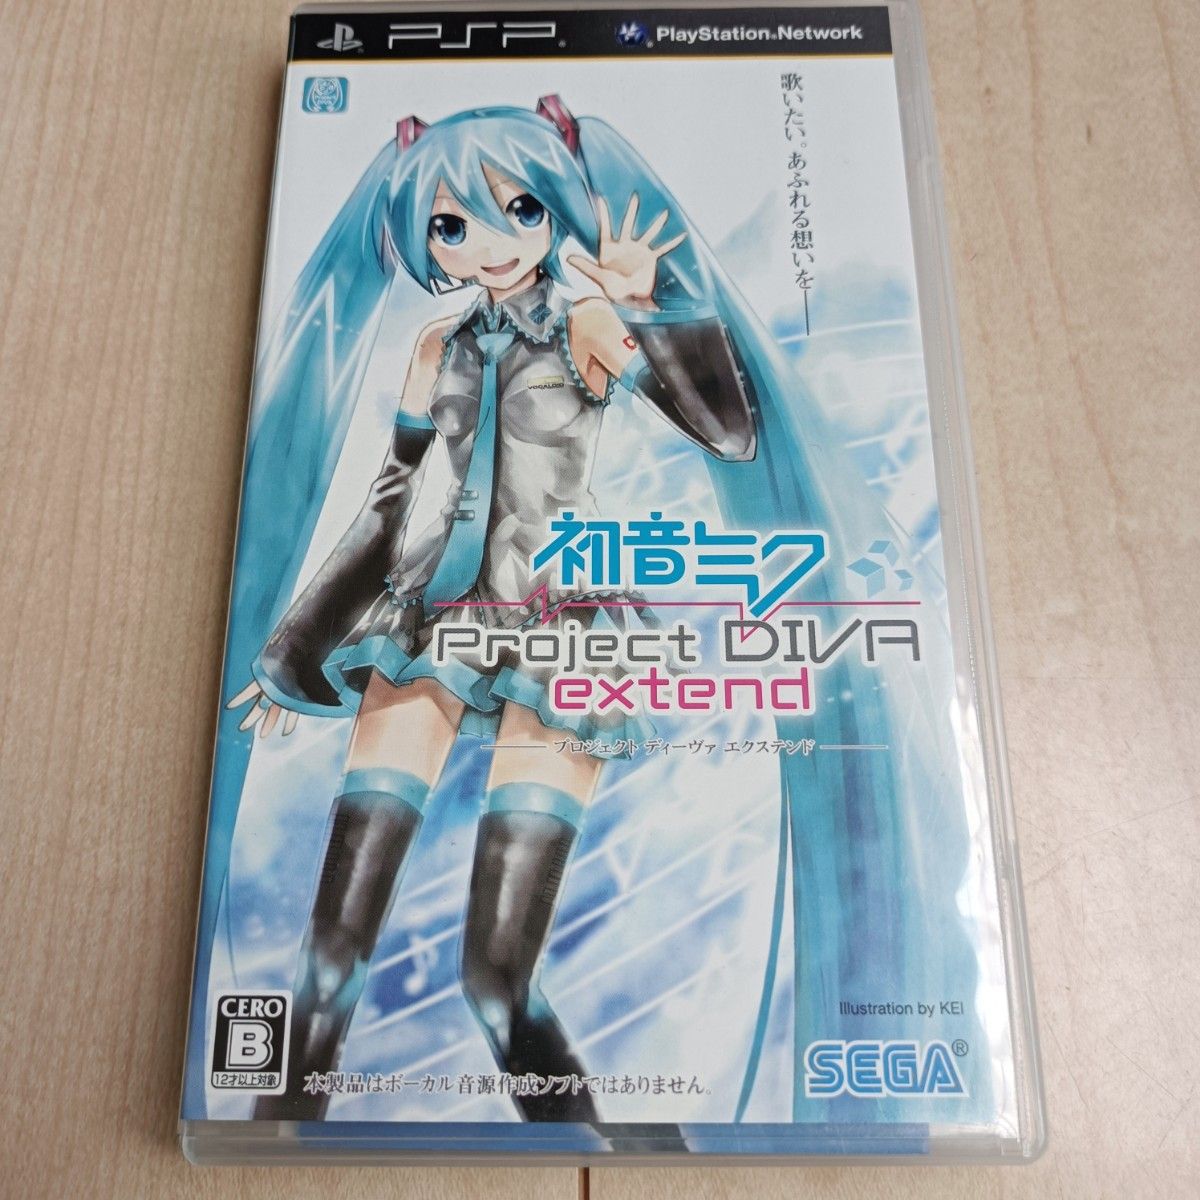 PSP 初音ミク Project DIVA extend